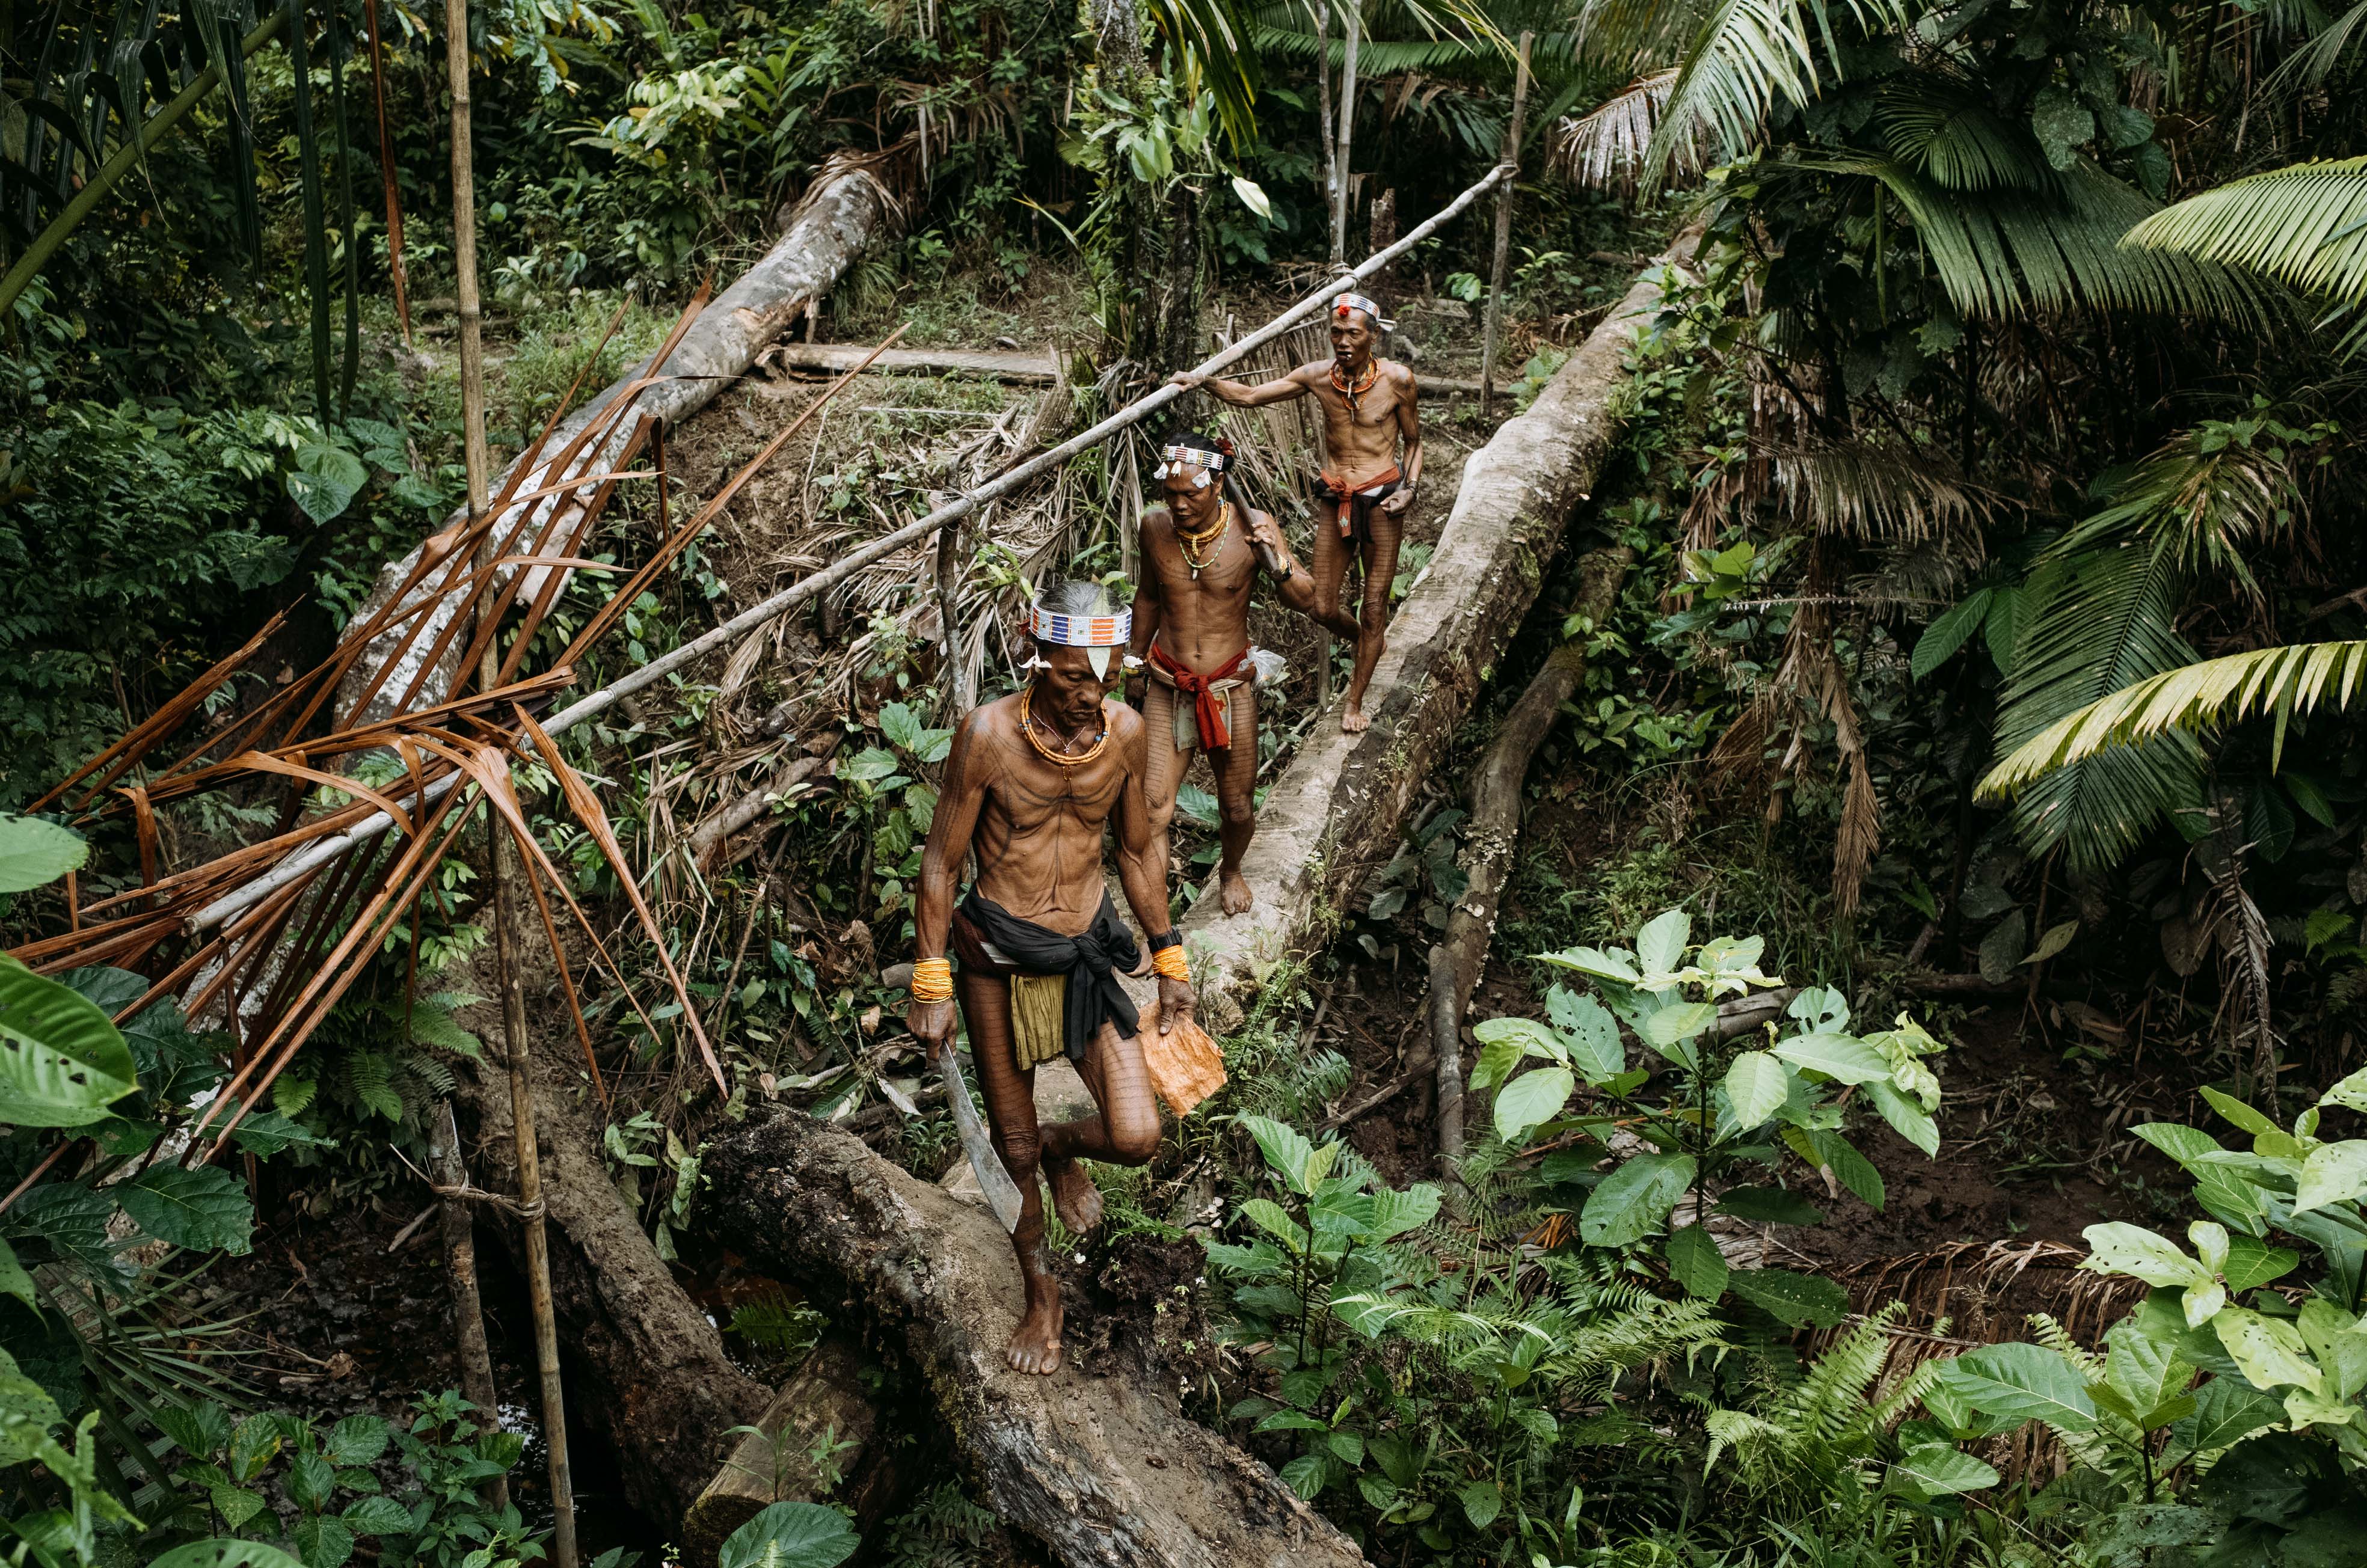 Mentawai tribe is a tribe who live in the forest of West Sumatra, Indonesia. They still live in tribe and there weren't  so many influence in their live. They live in the forest in the big house and lead by a man that called Aman (or maybe SHAMAN) in their language. 